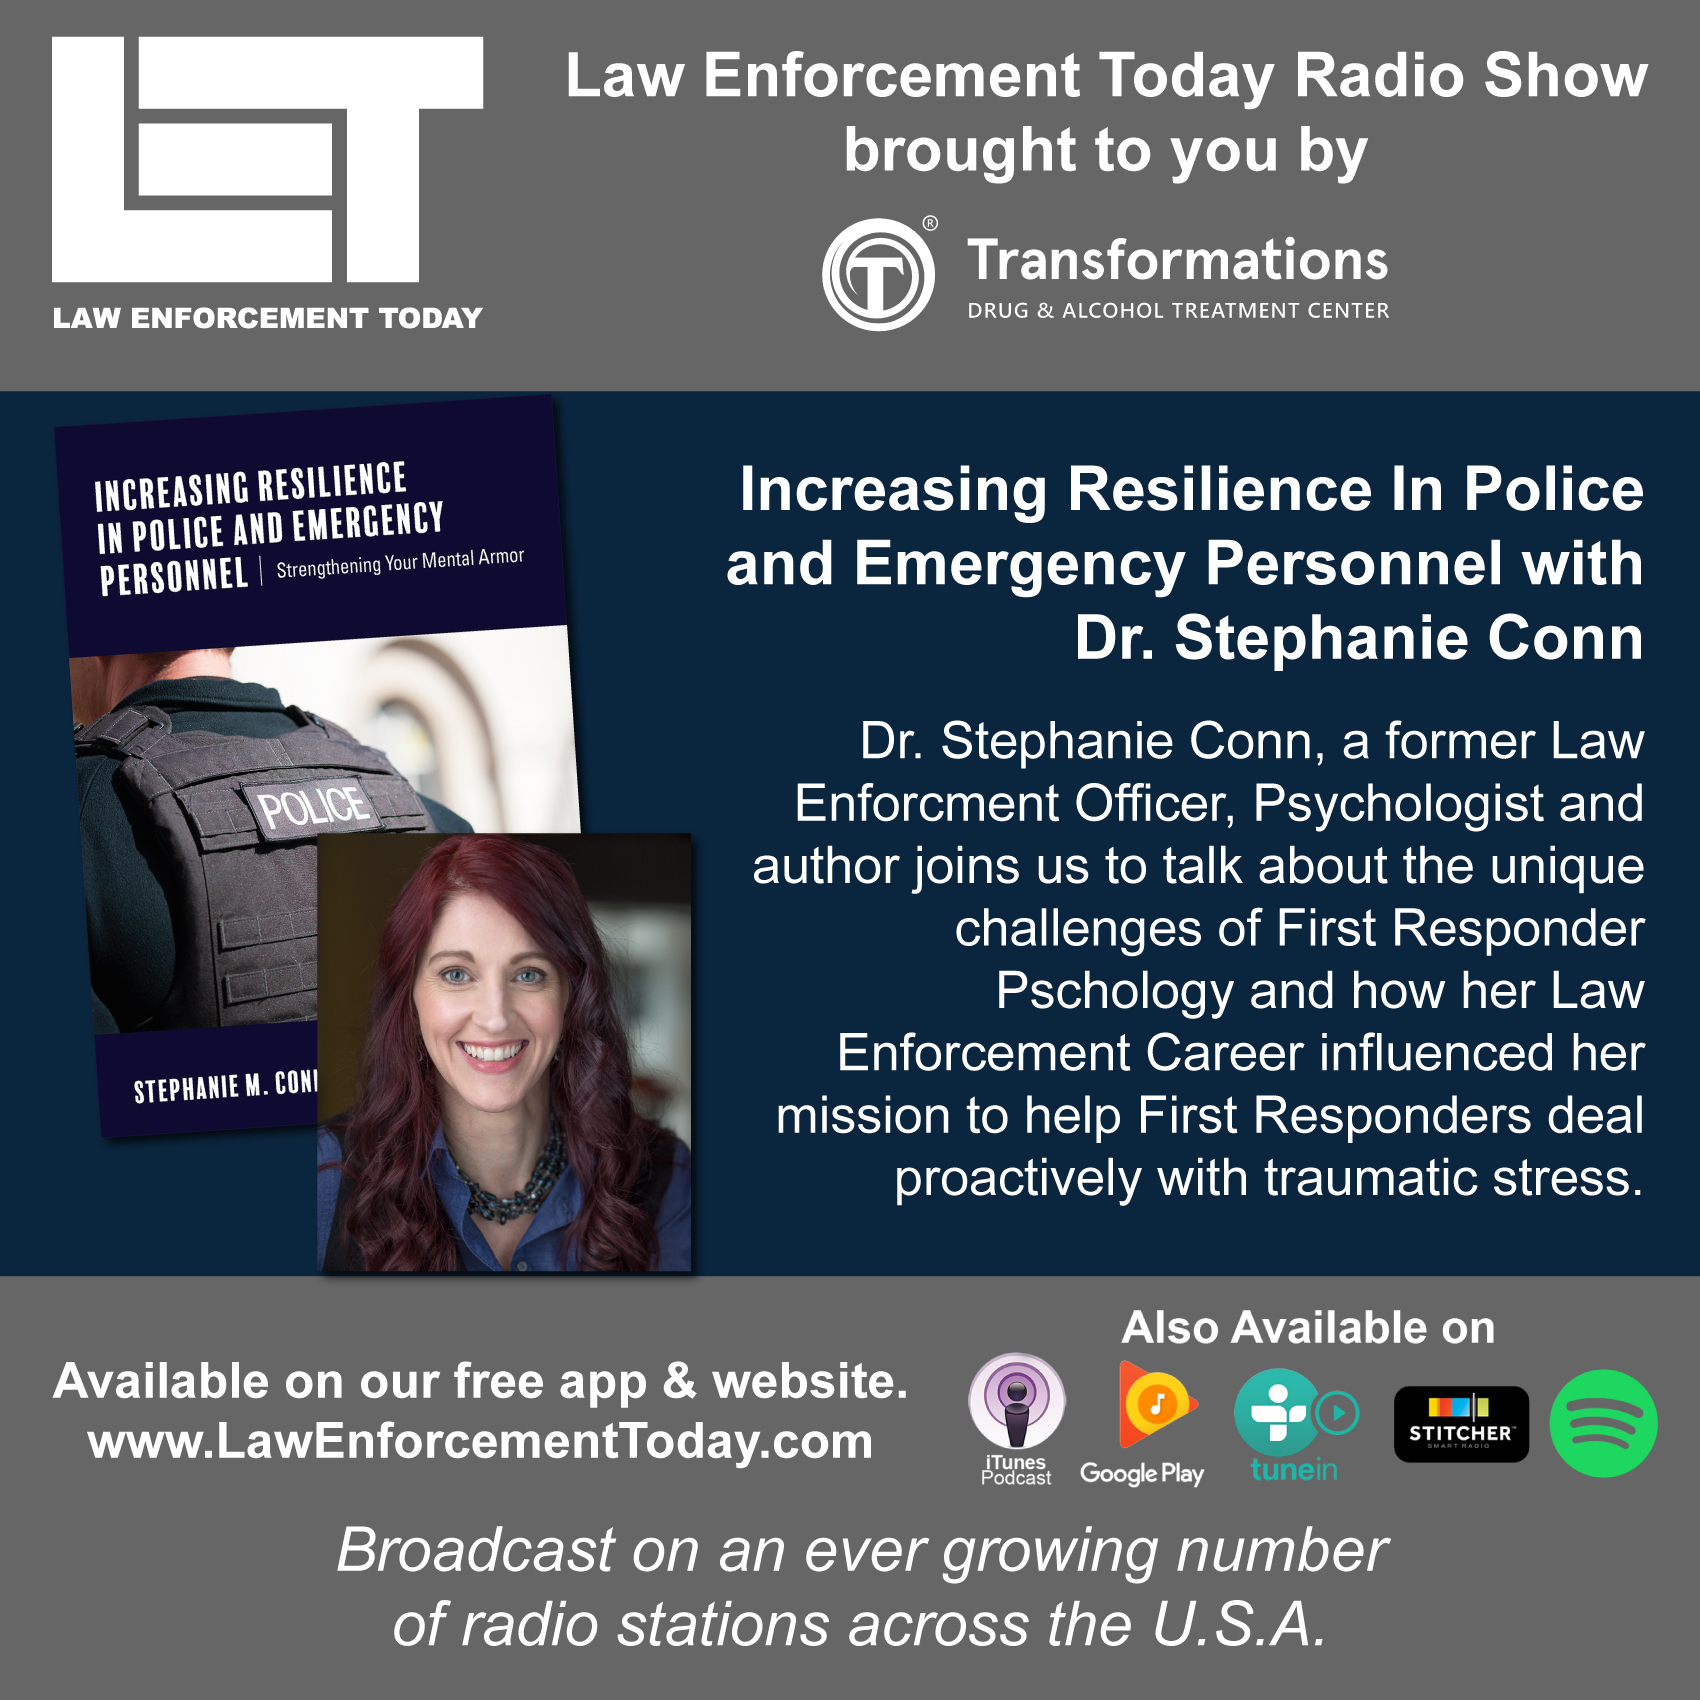 S2E45: Dr. Stephanie Conn, a former Law Enforcement Officer and Psychologist talks about First Responder Related Trauma